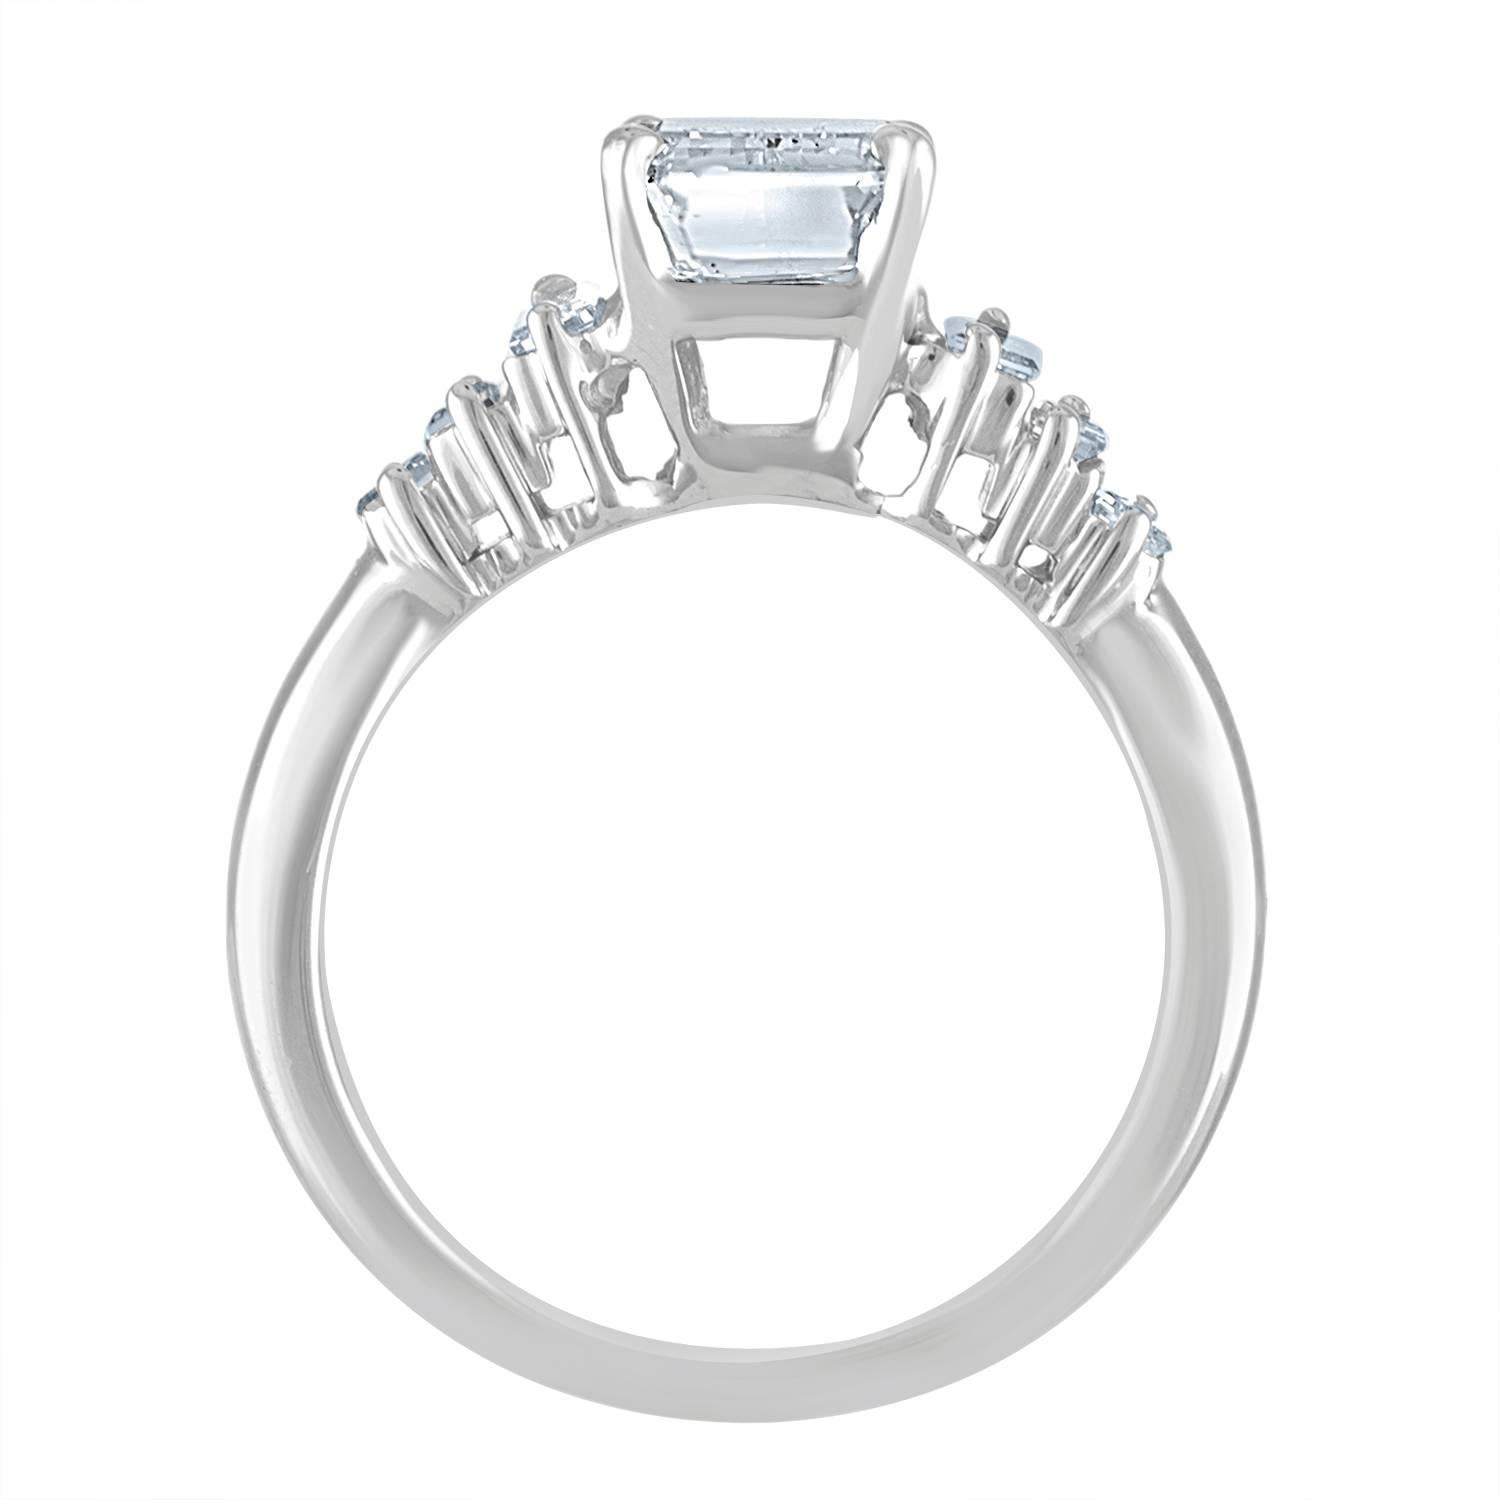 Contemporary 2.54 Carat GIA Certified Emerald Cut Diamond Ring For Sale